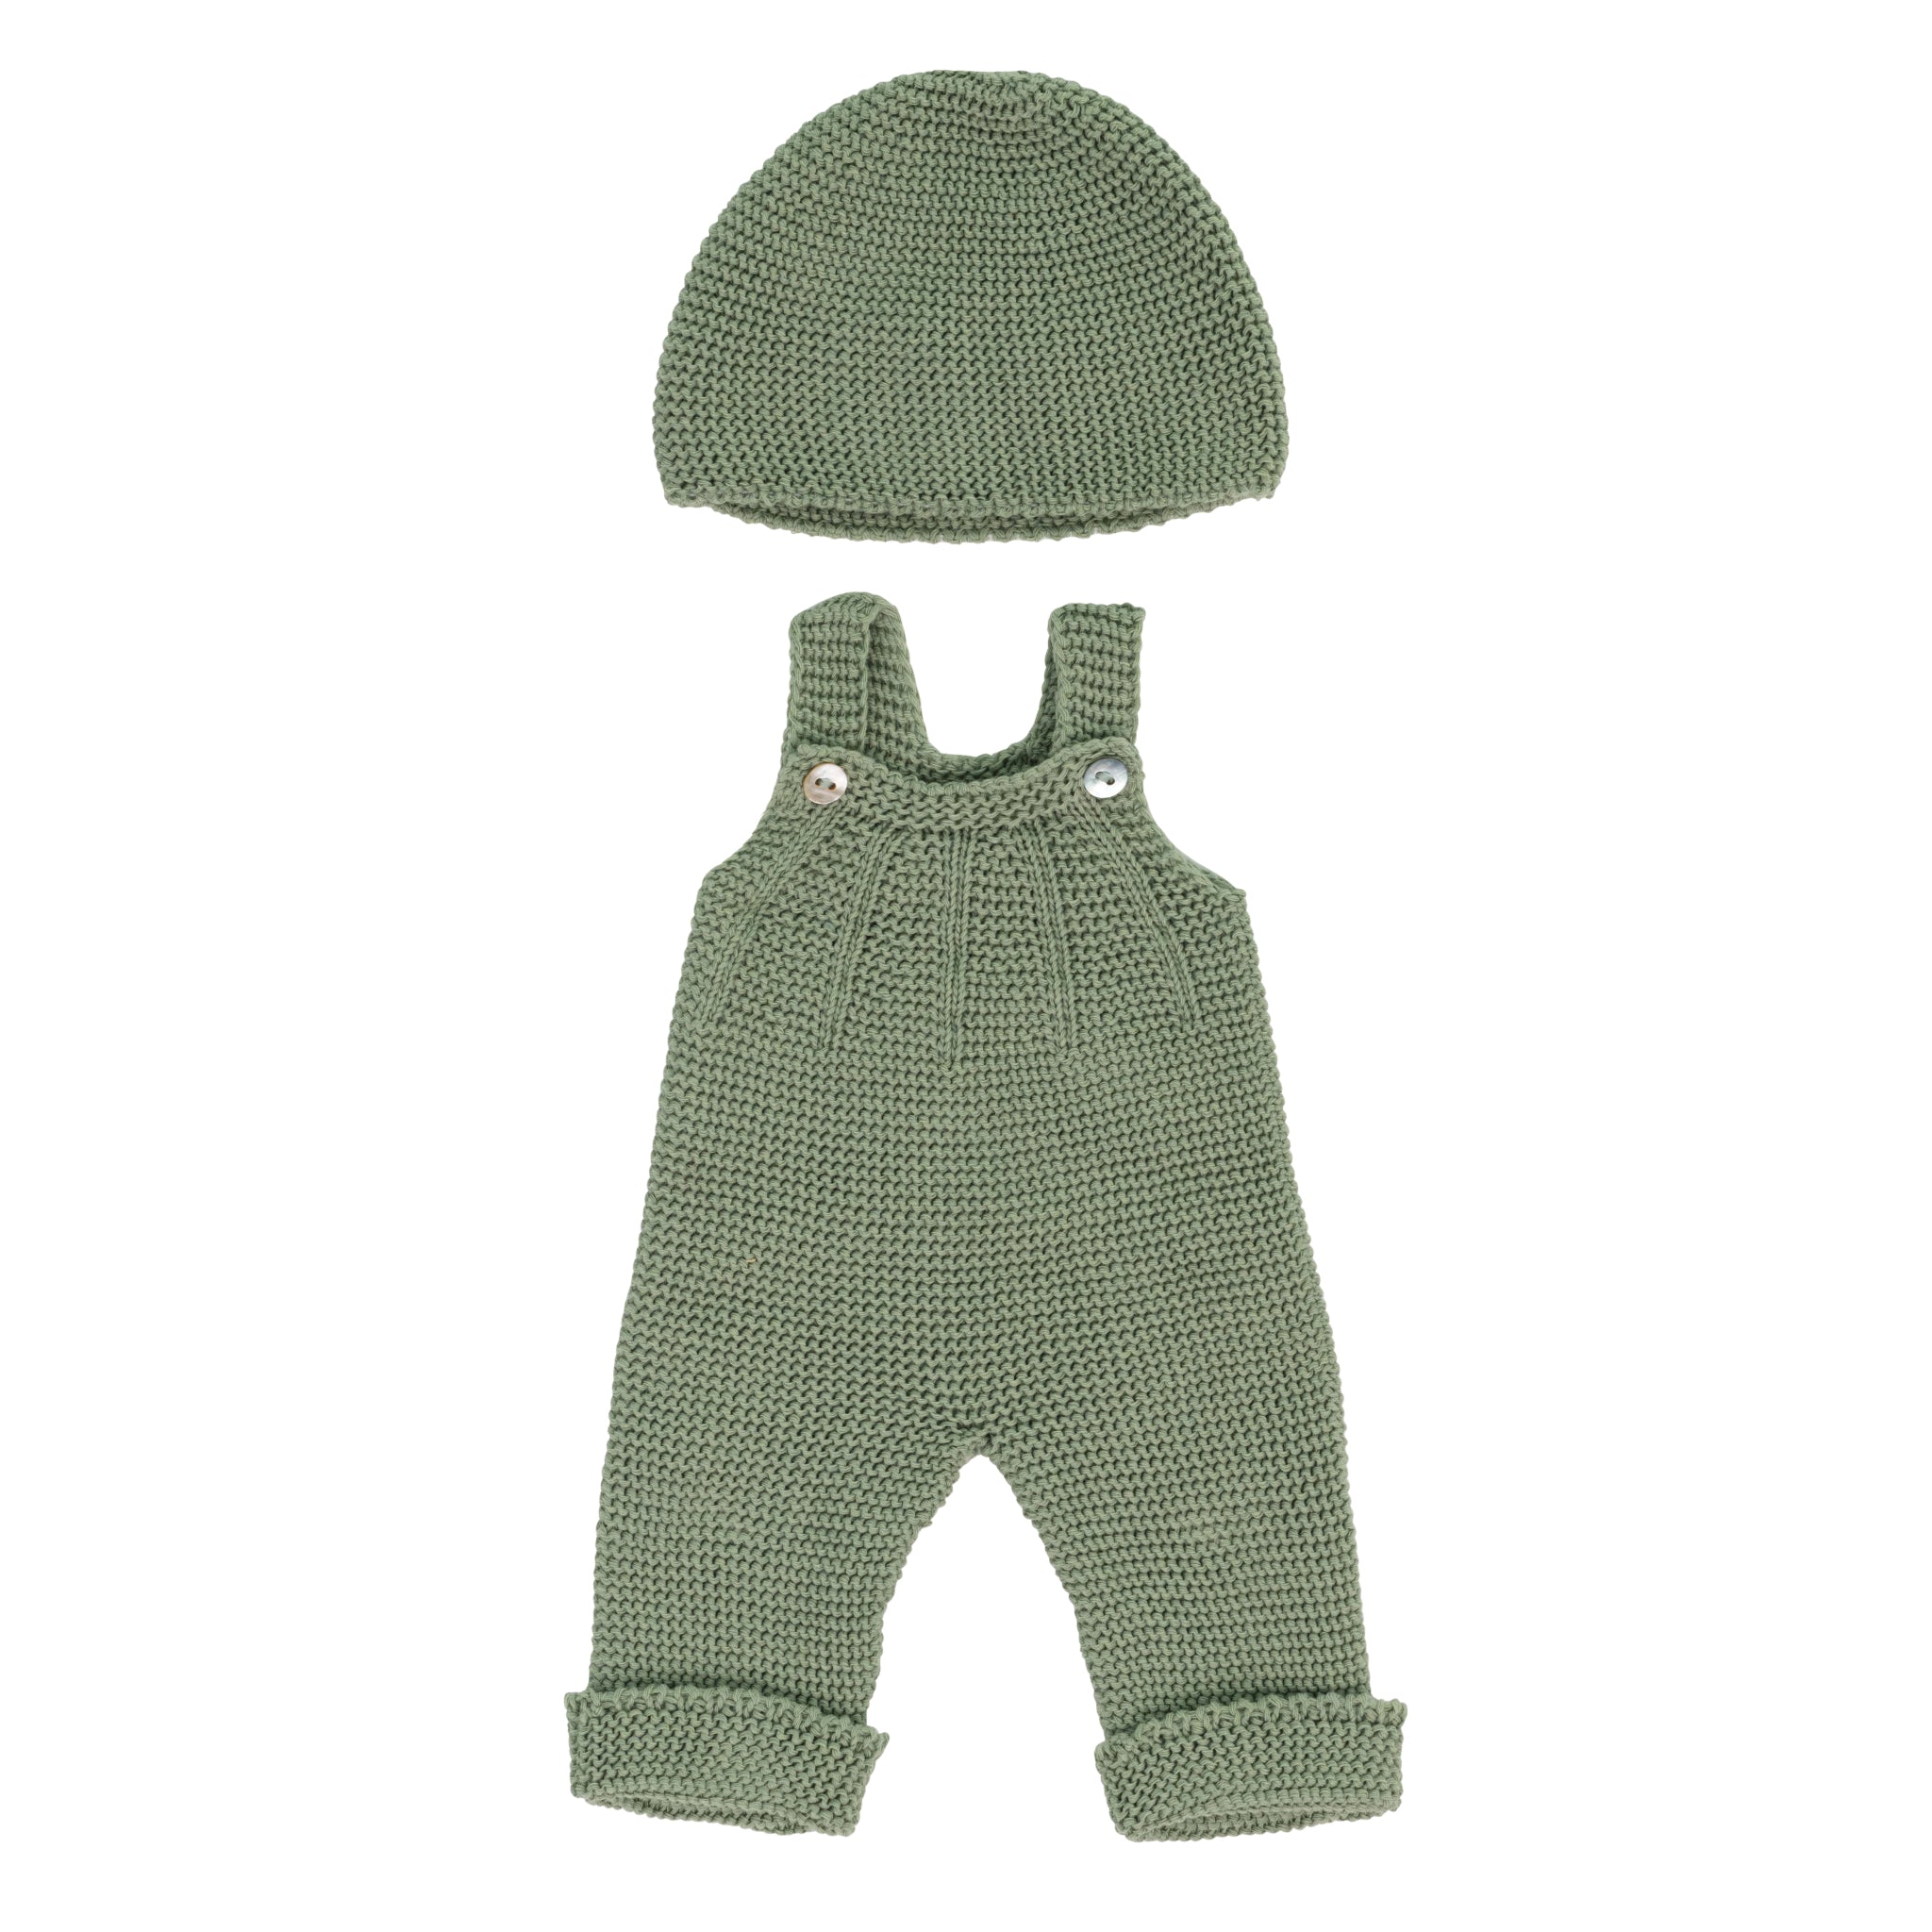 Miniland Knitted green Overall Doll Outfit (38cm dolls)